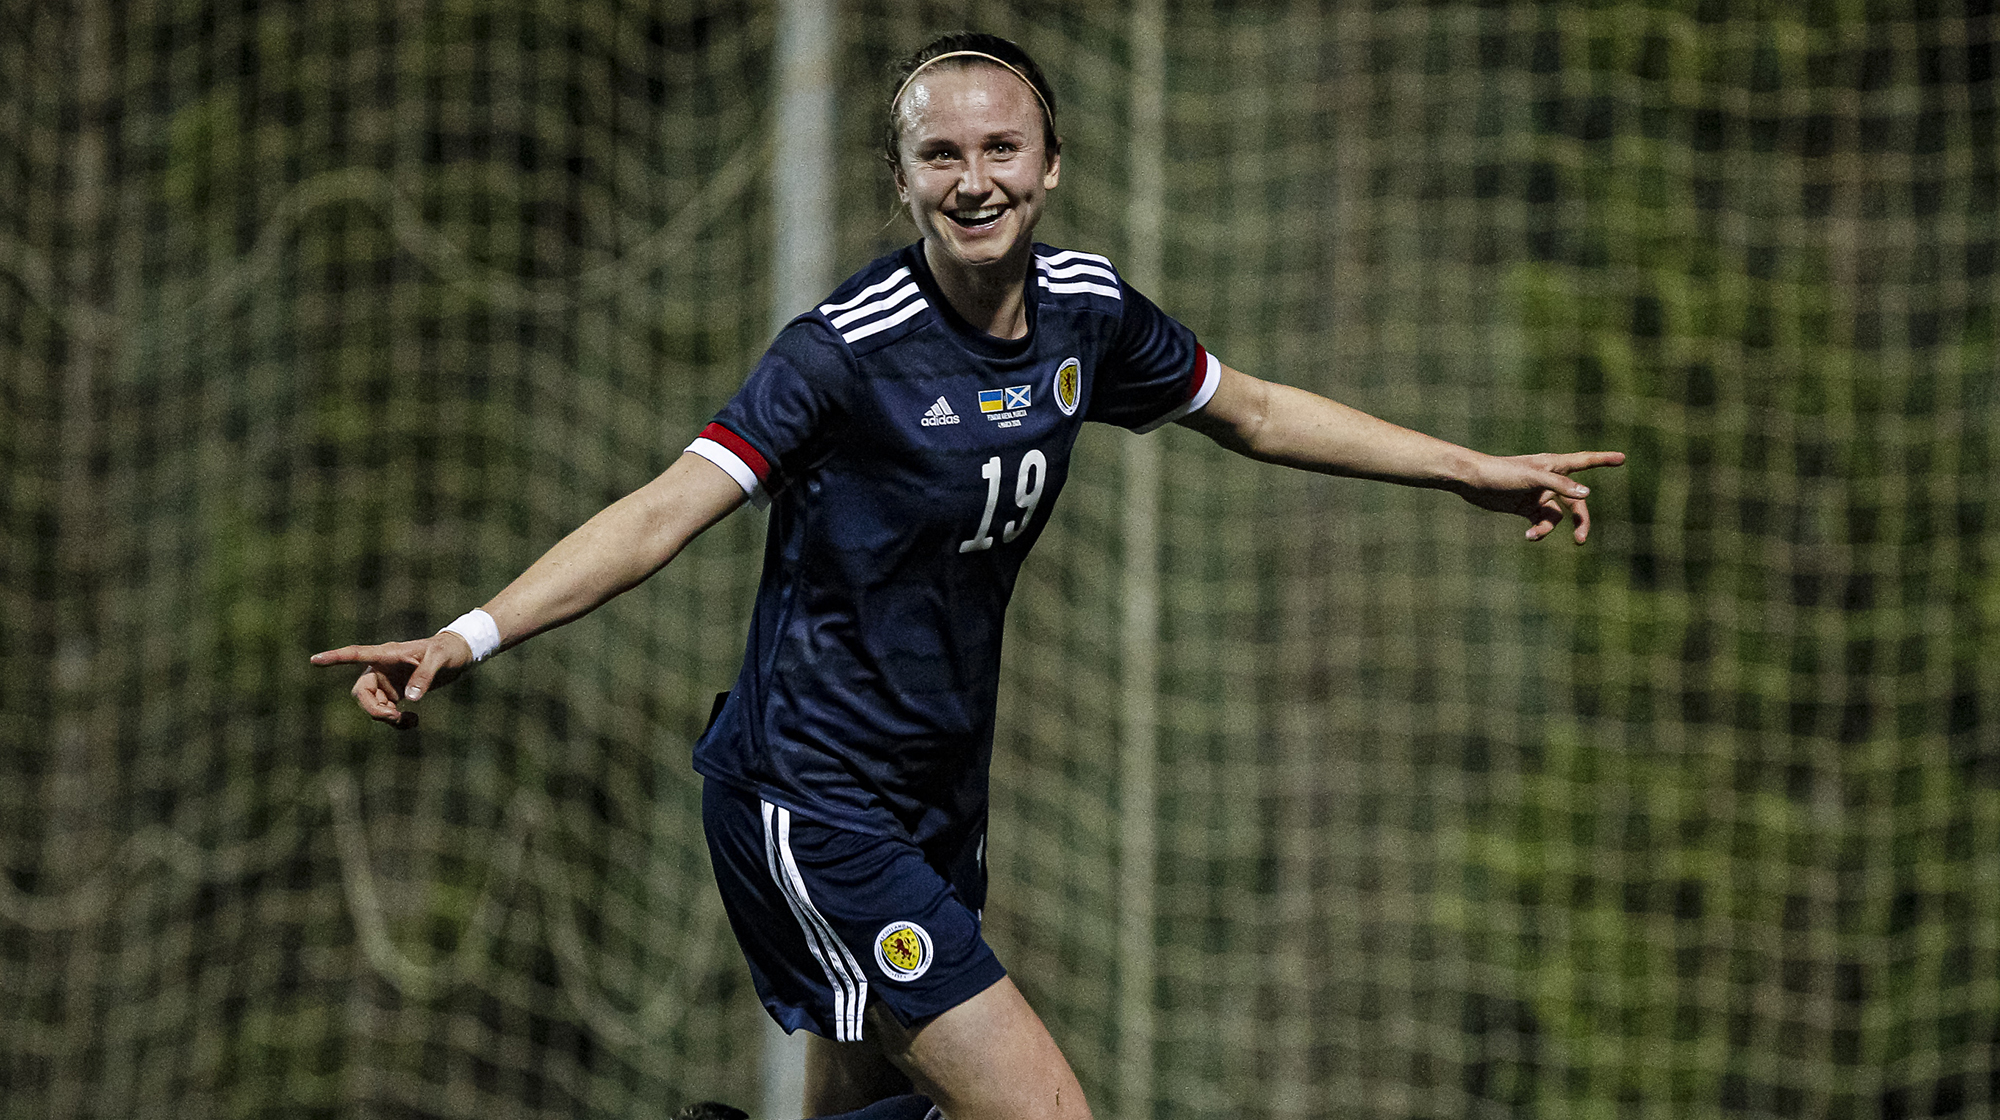 Former Charlotte star excels with Scotland